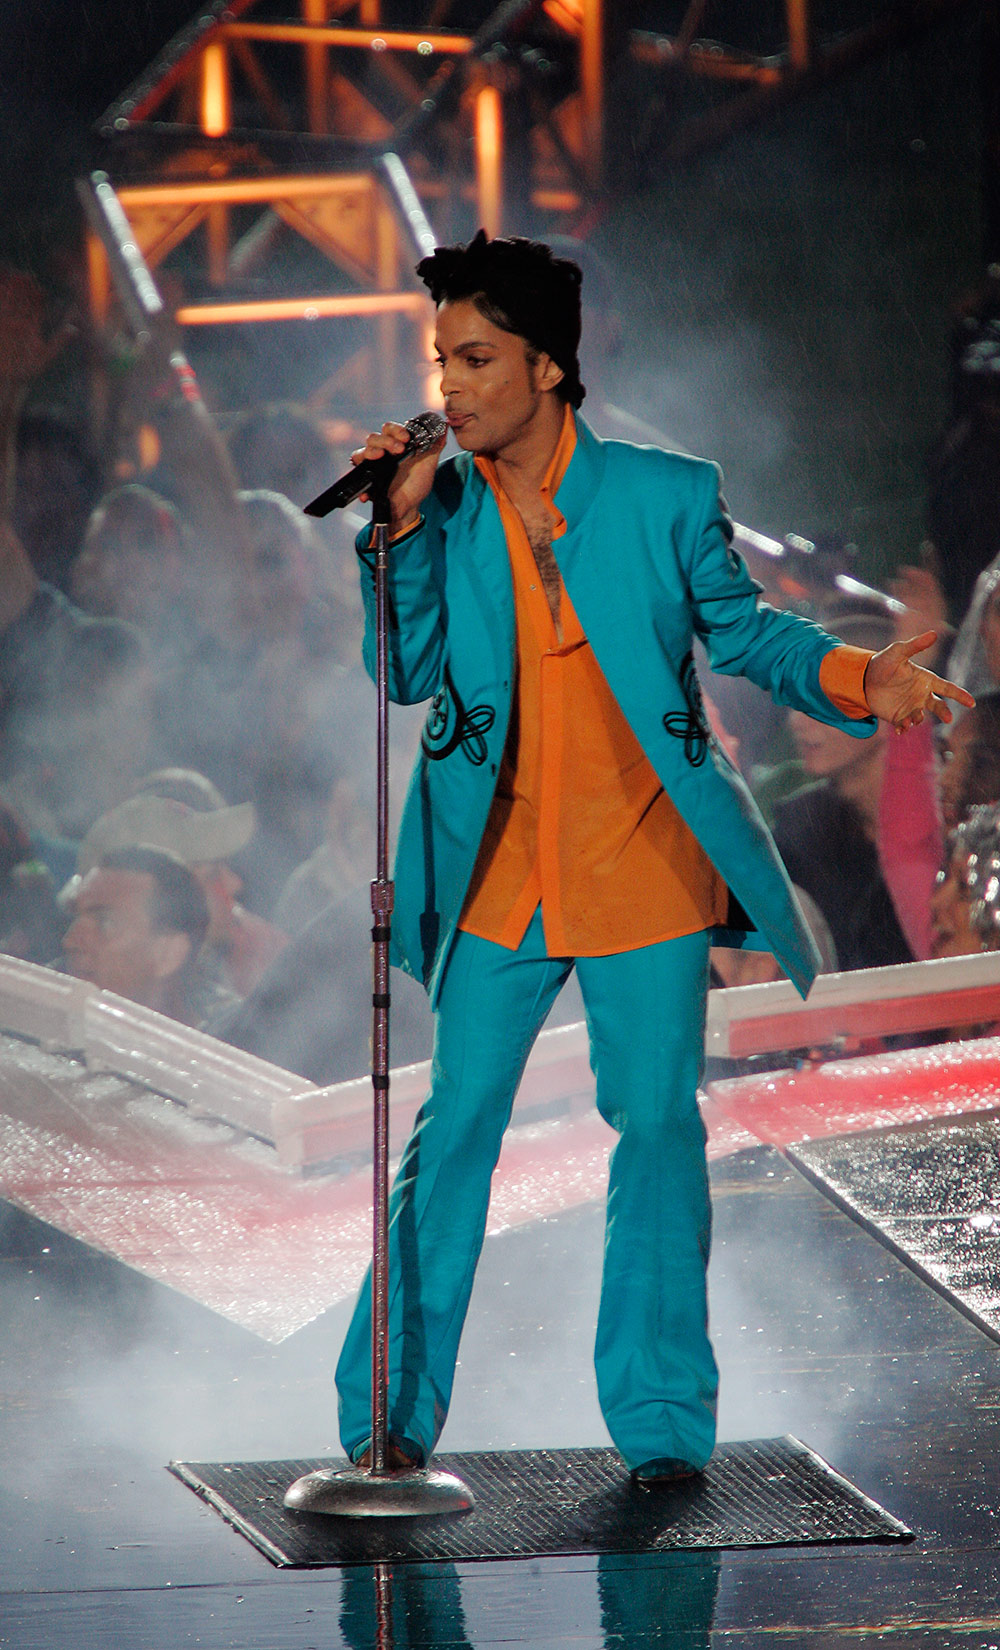 Performing at the Pepsi Halftime Show during the Super Bowl XLI in 2007.